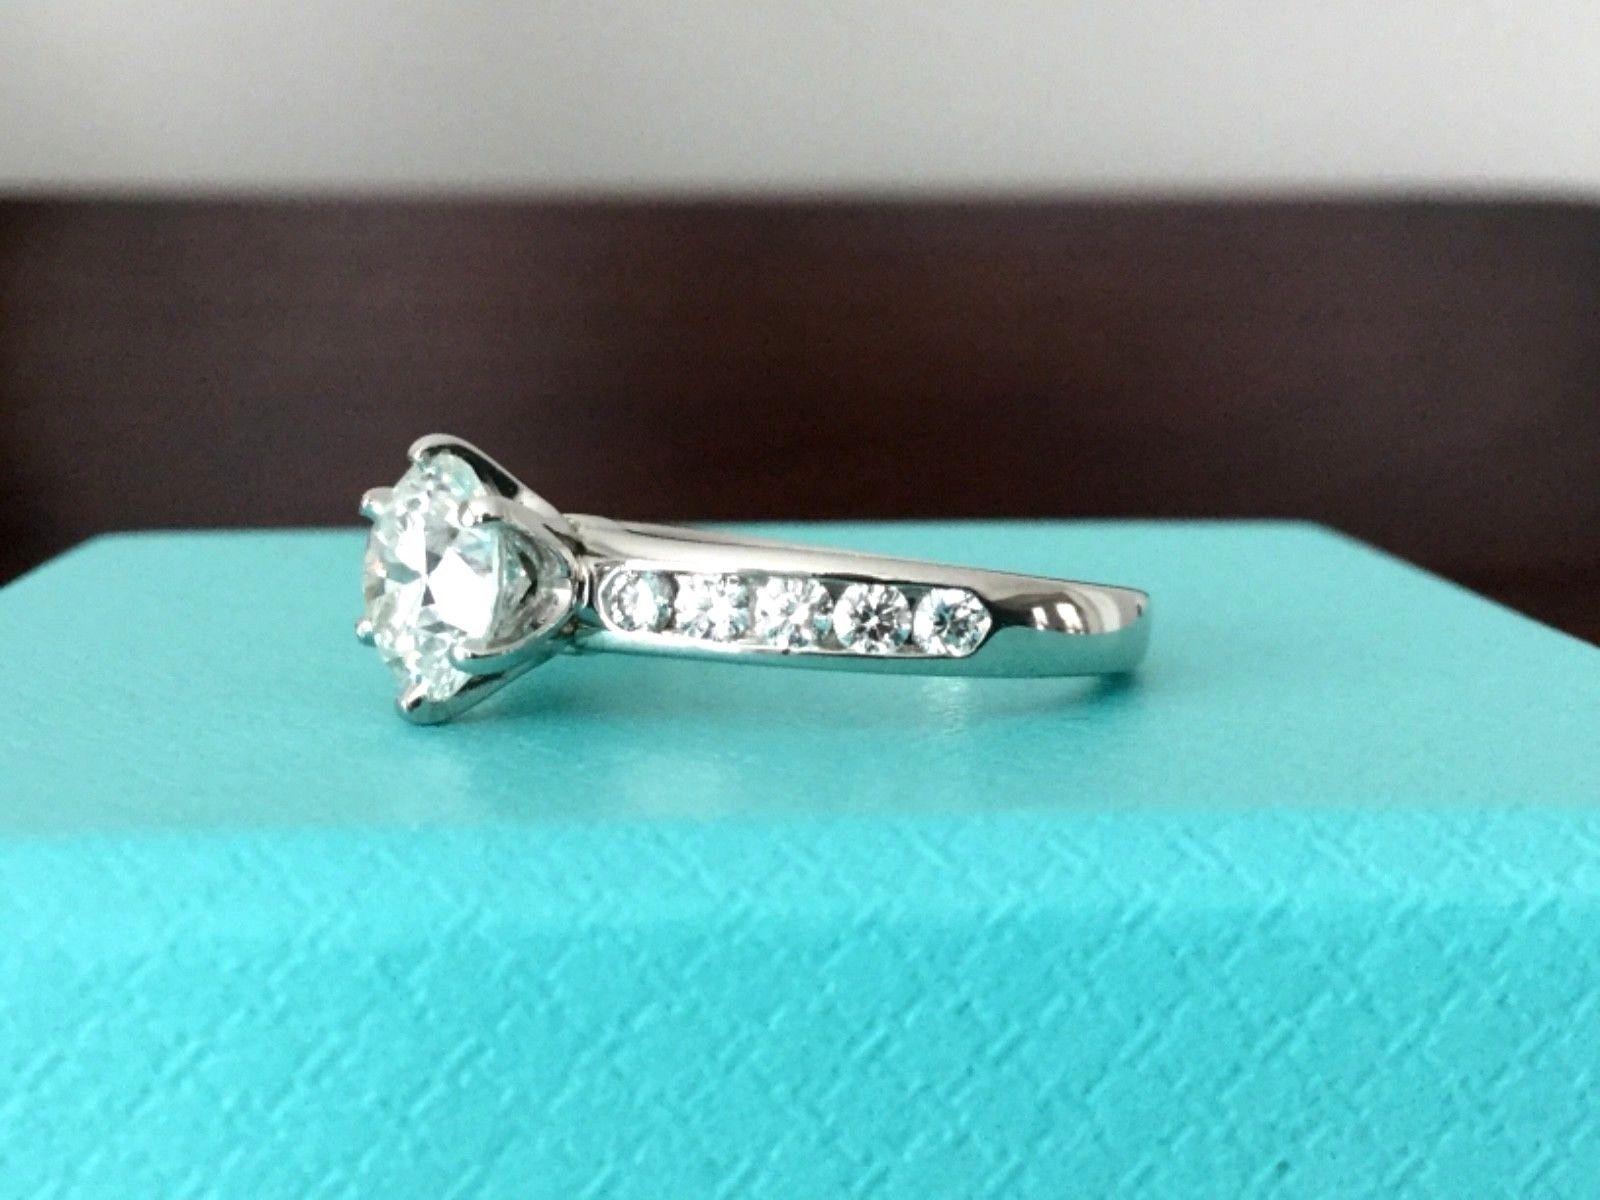 Tiffany & Co. Platinum Diamond 1.24 Carat Round Engagement Ring H VVS2 In Excellent Condition For Sale In Middletown, DE